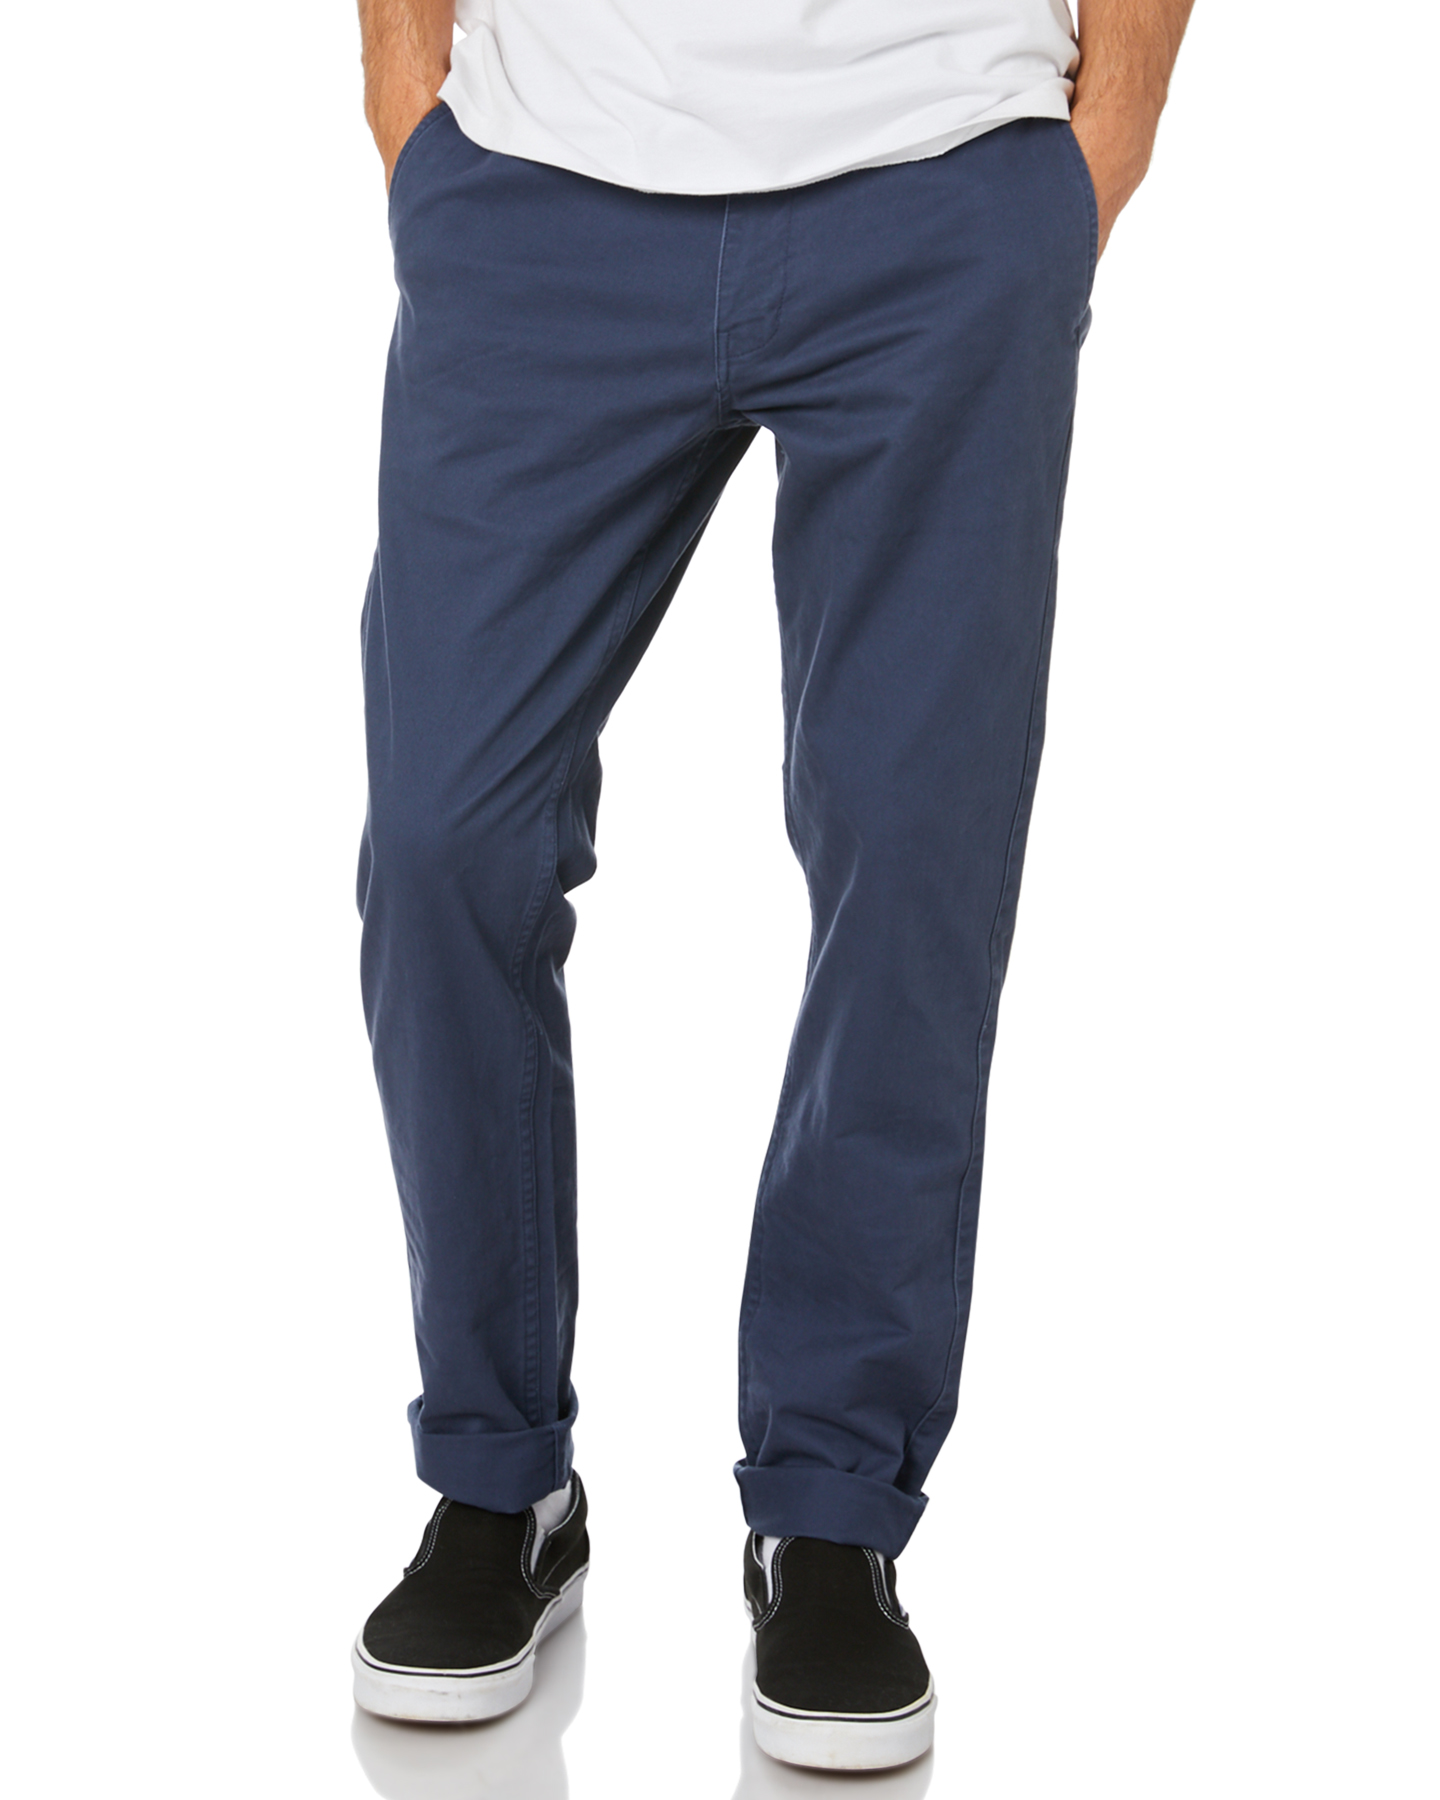 Rip Curl Epic Mens Pant - Navy | SurfStitch